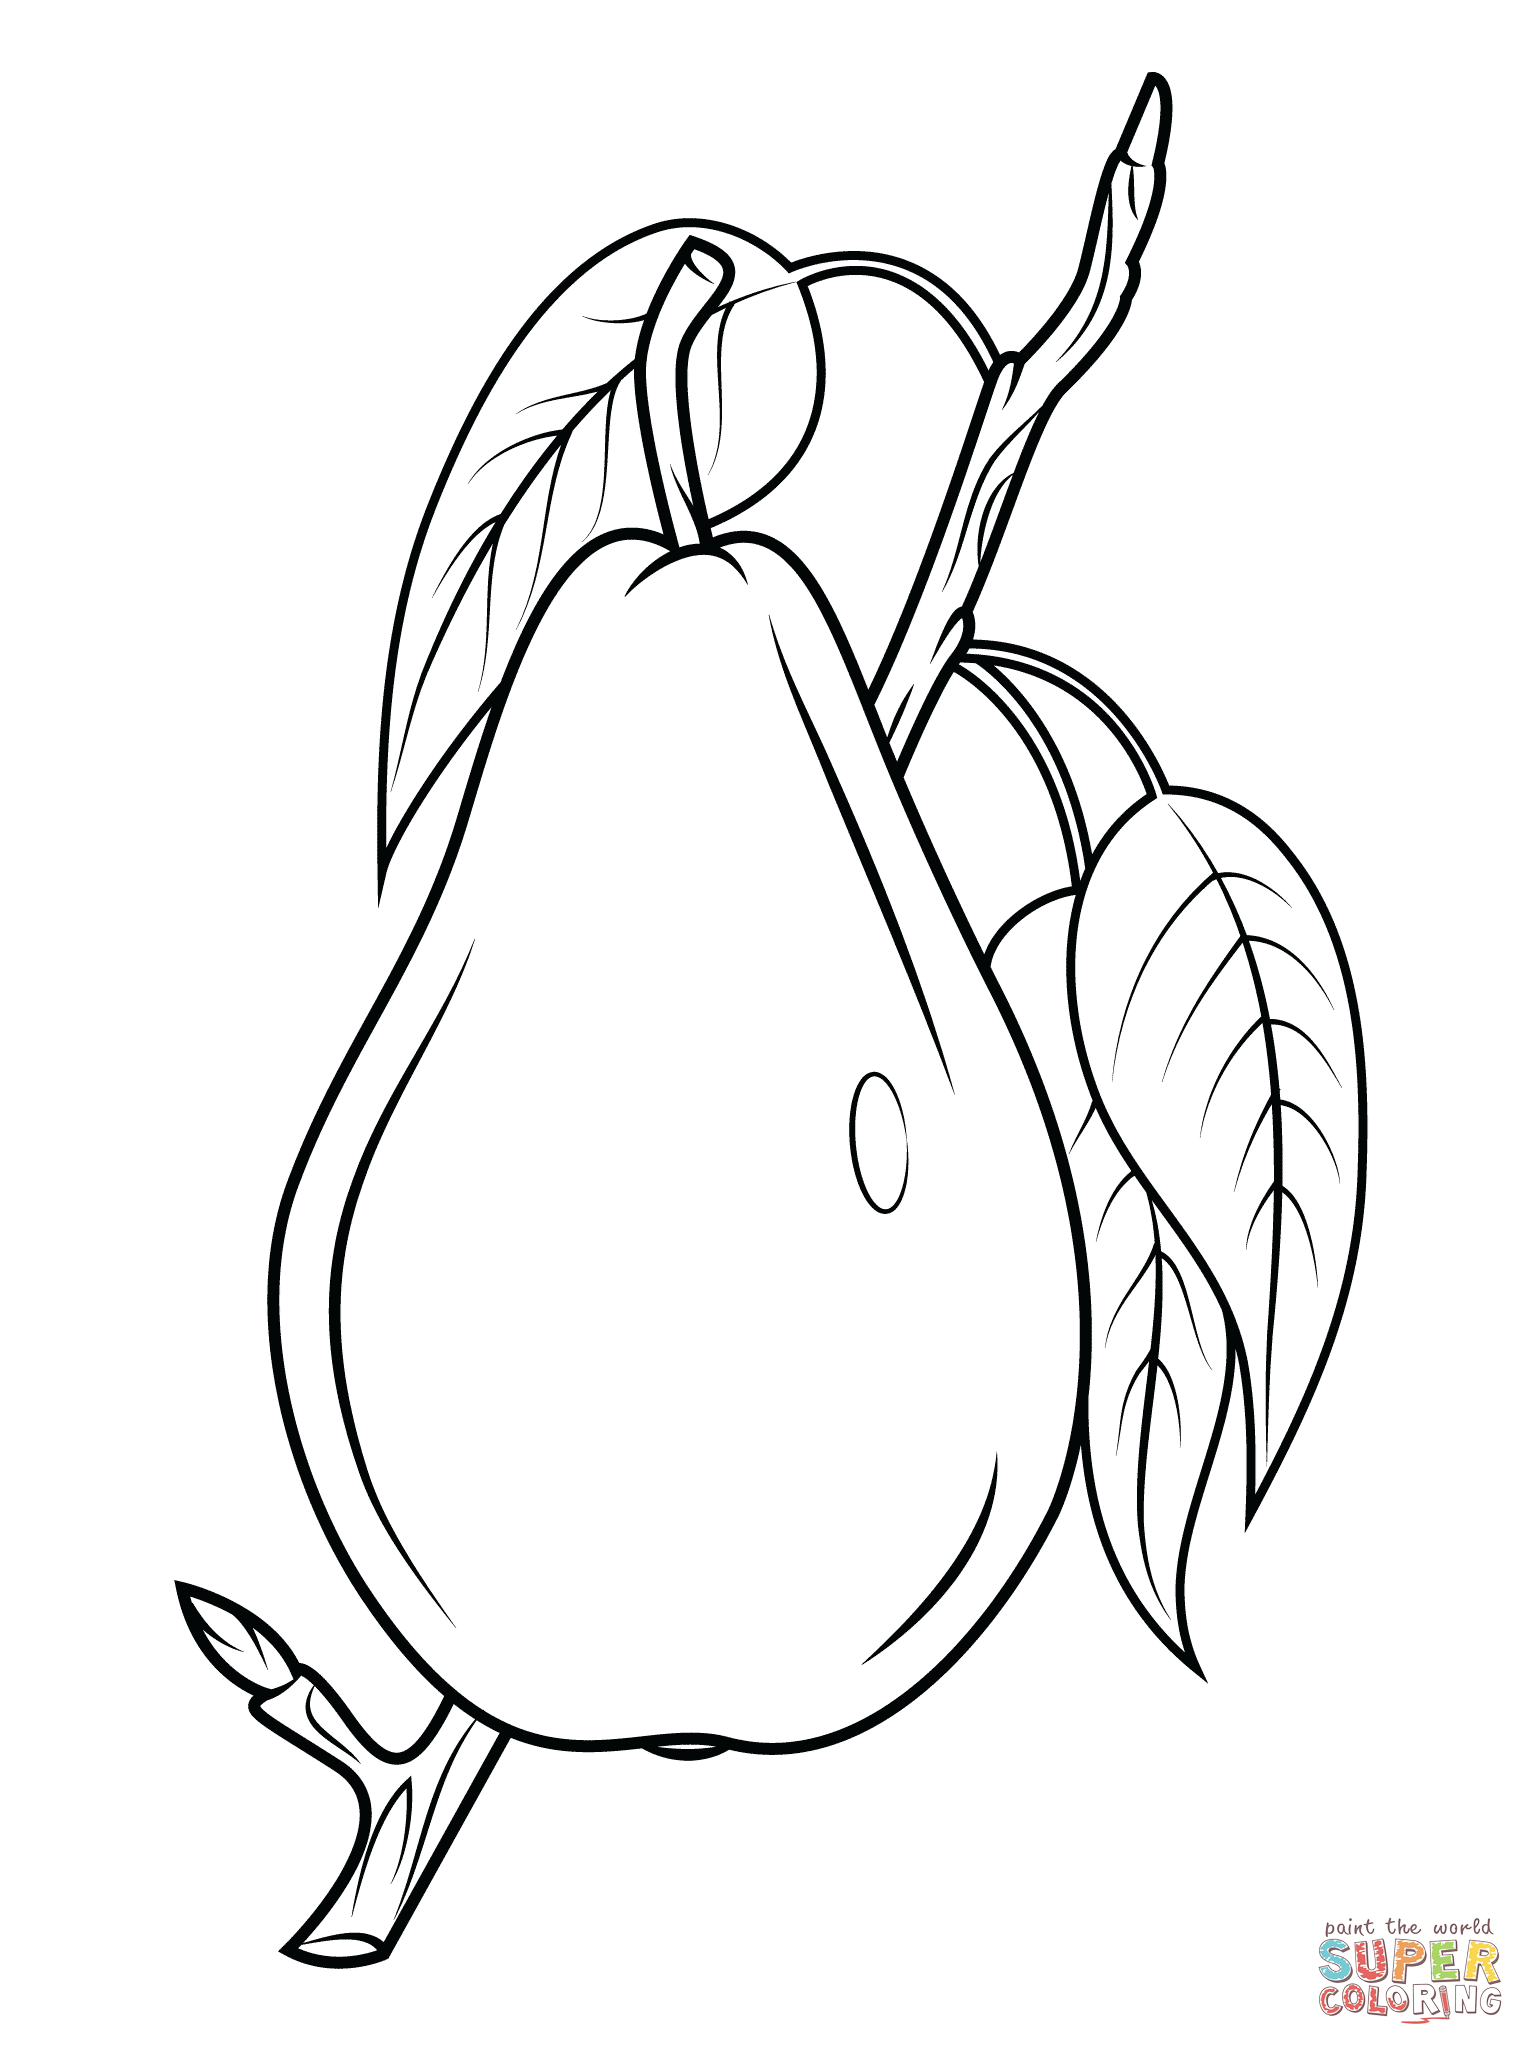 Pear on branch coloring page | Free Printable Coloring Pages